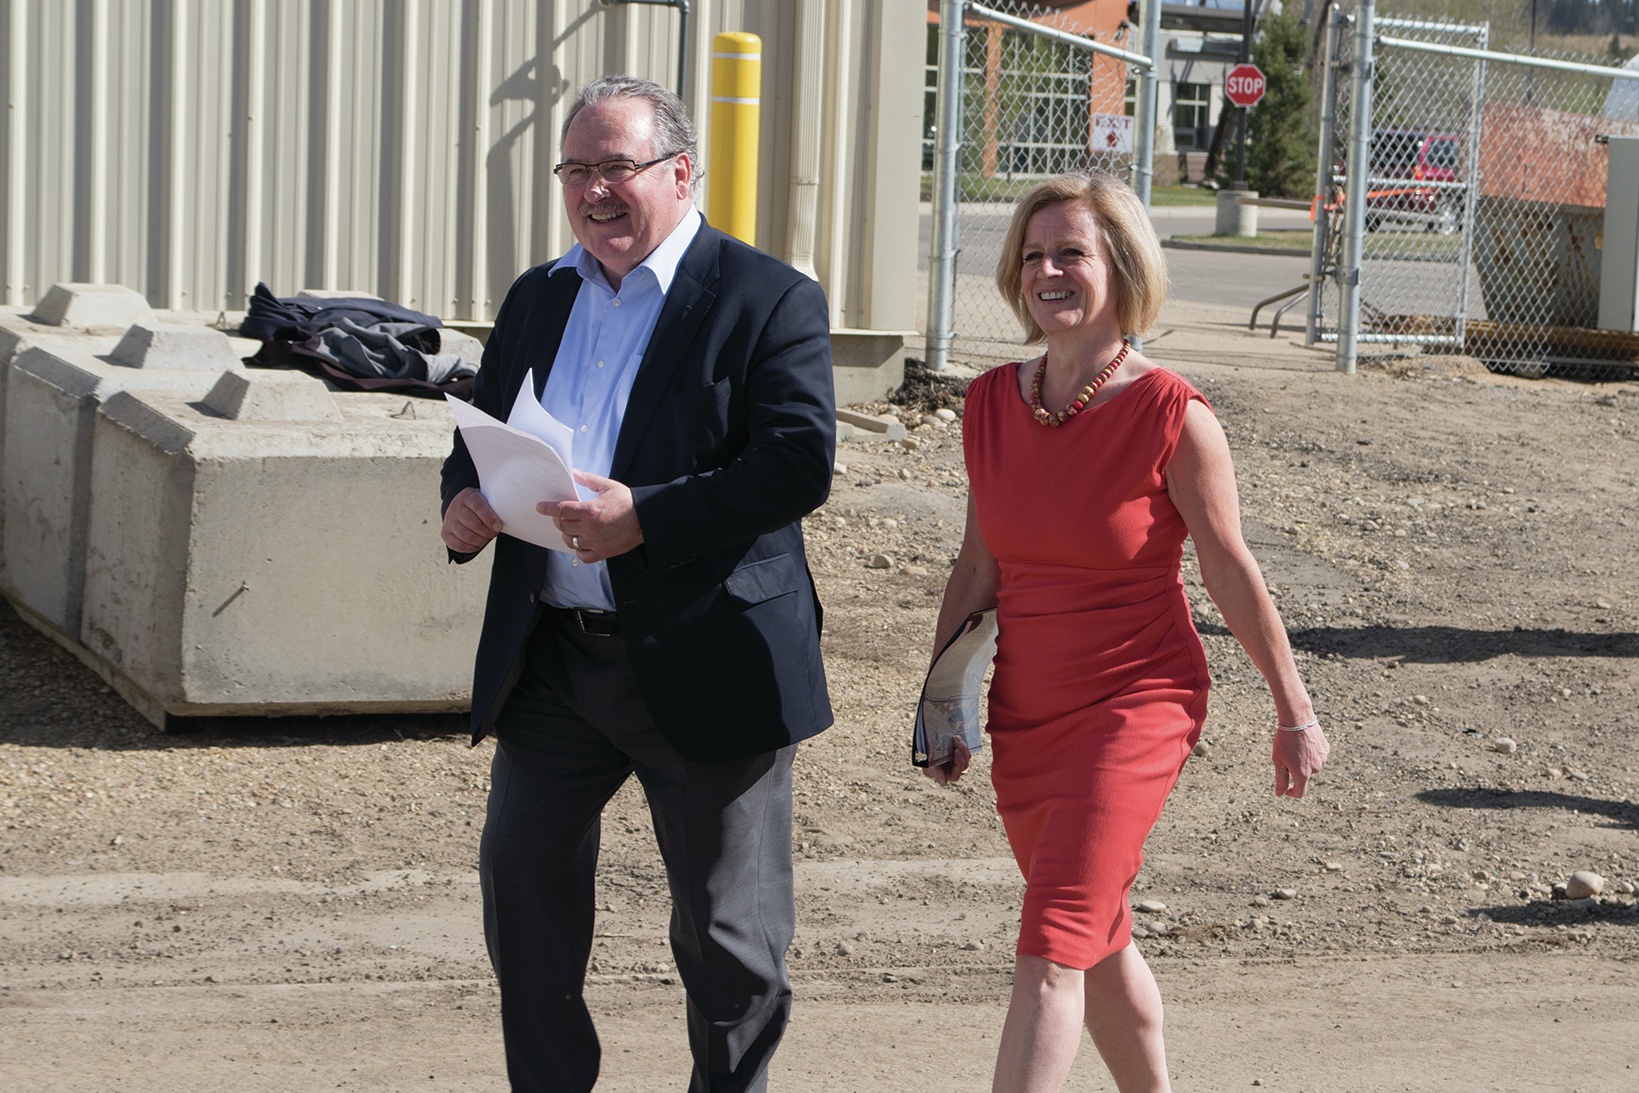 ANNOUNCEMENTS - Minister of Transportation Brian Mason walked alongside Premier Rachel Notley as the two greeted City of Red Deer officials and stakeholders to announce $100 million in infrastructure development funds for a new interchange at the intersection of Gaetz Avenue and Taylor Drive